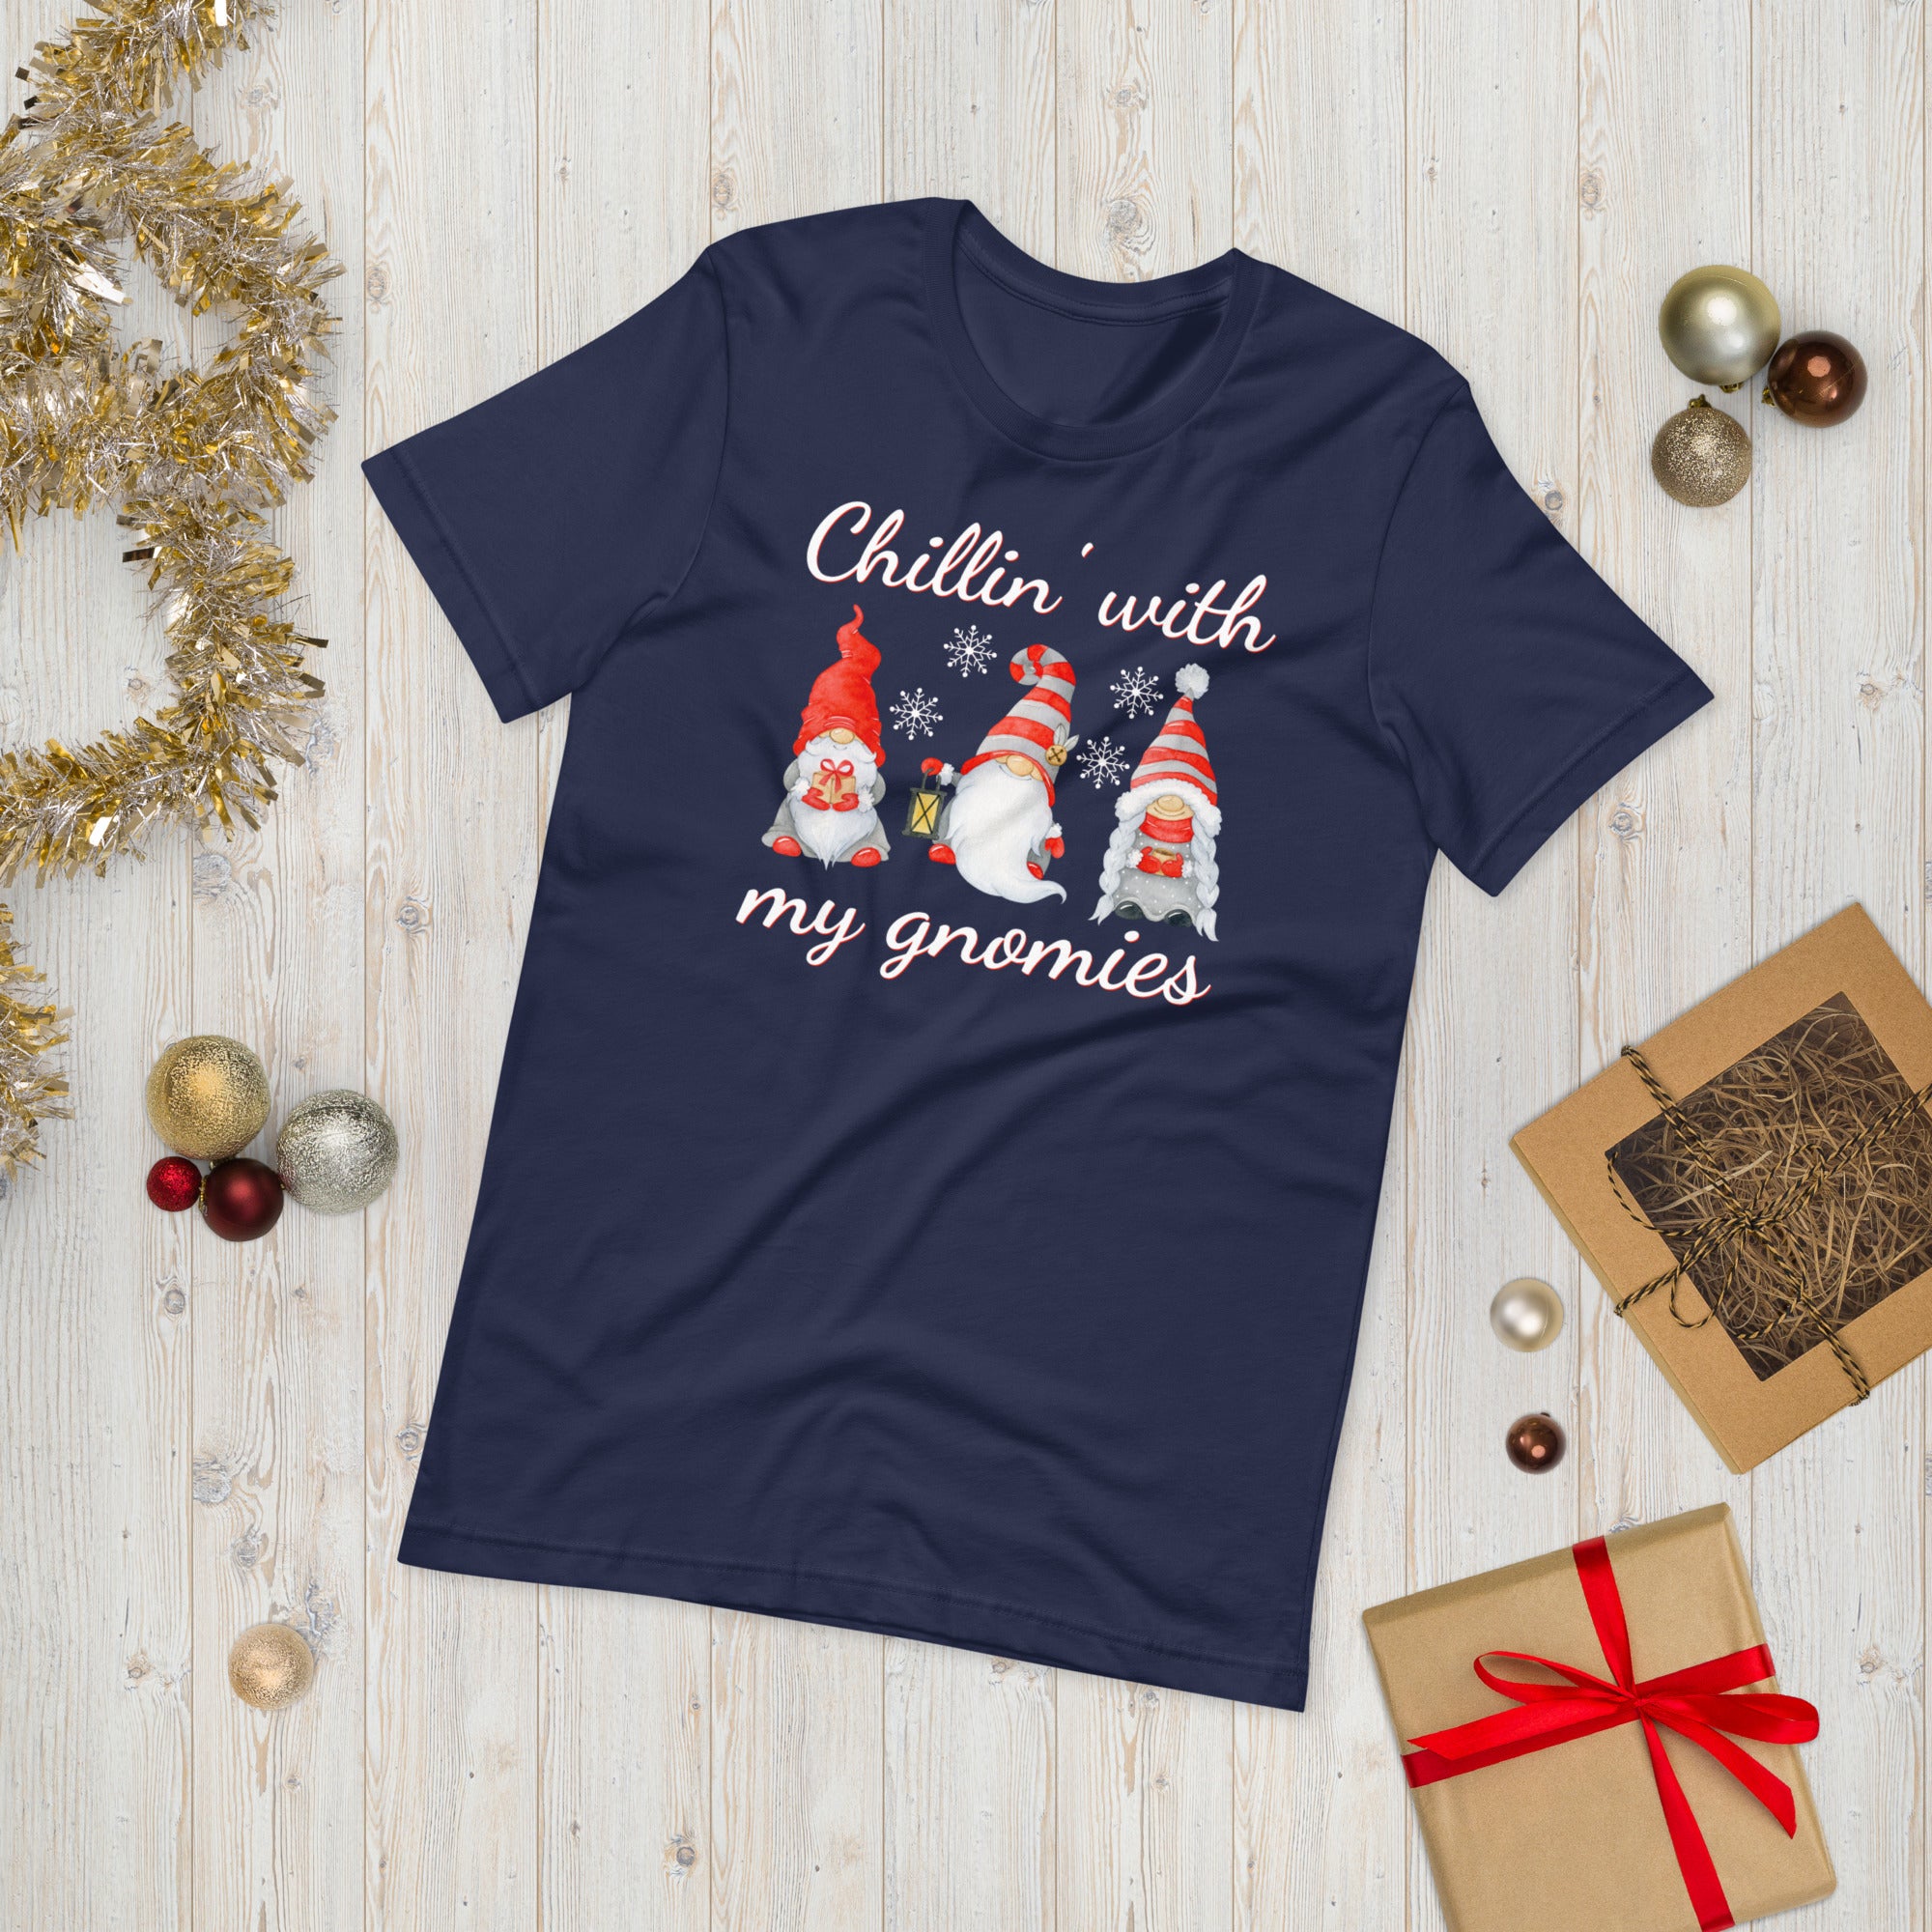 Chillin With My Gnomies Shirt, Funny Chilling Gnomes Shirt, Gnomes Christmas Shirt, Gnome Shirt, Cute Gnome Shirt, Winter Gnome Shirt